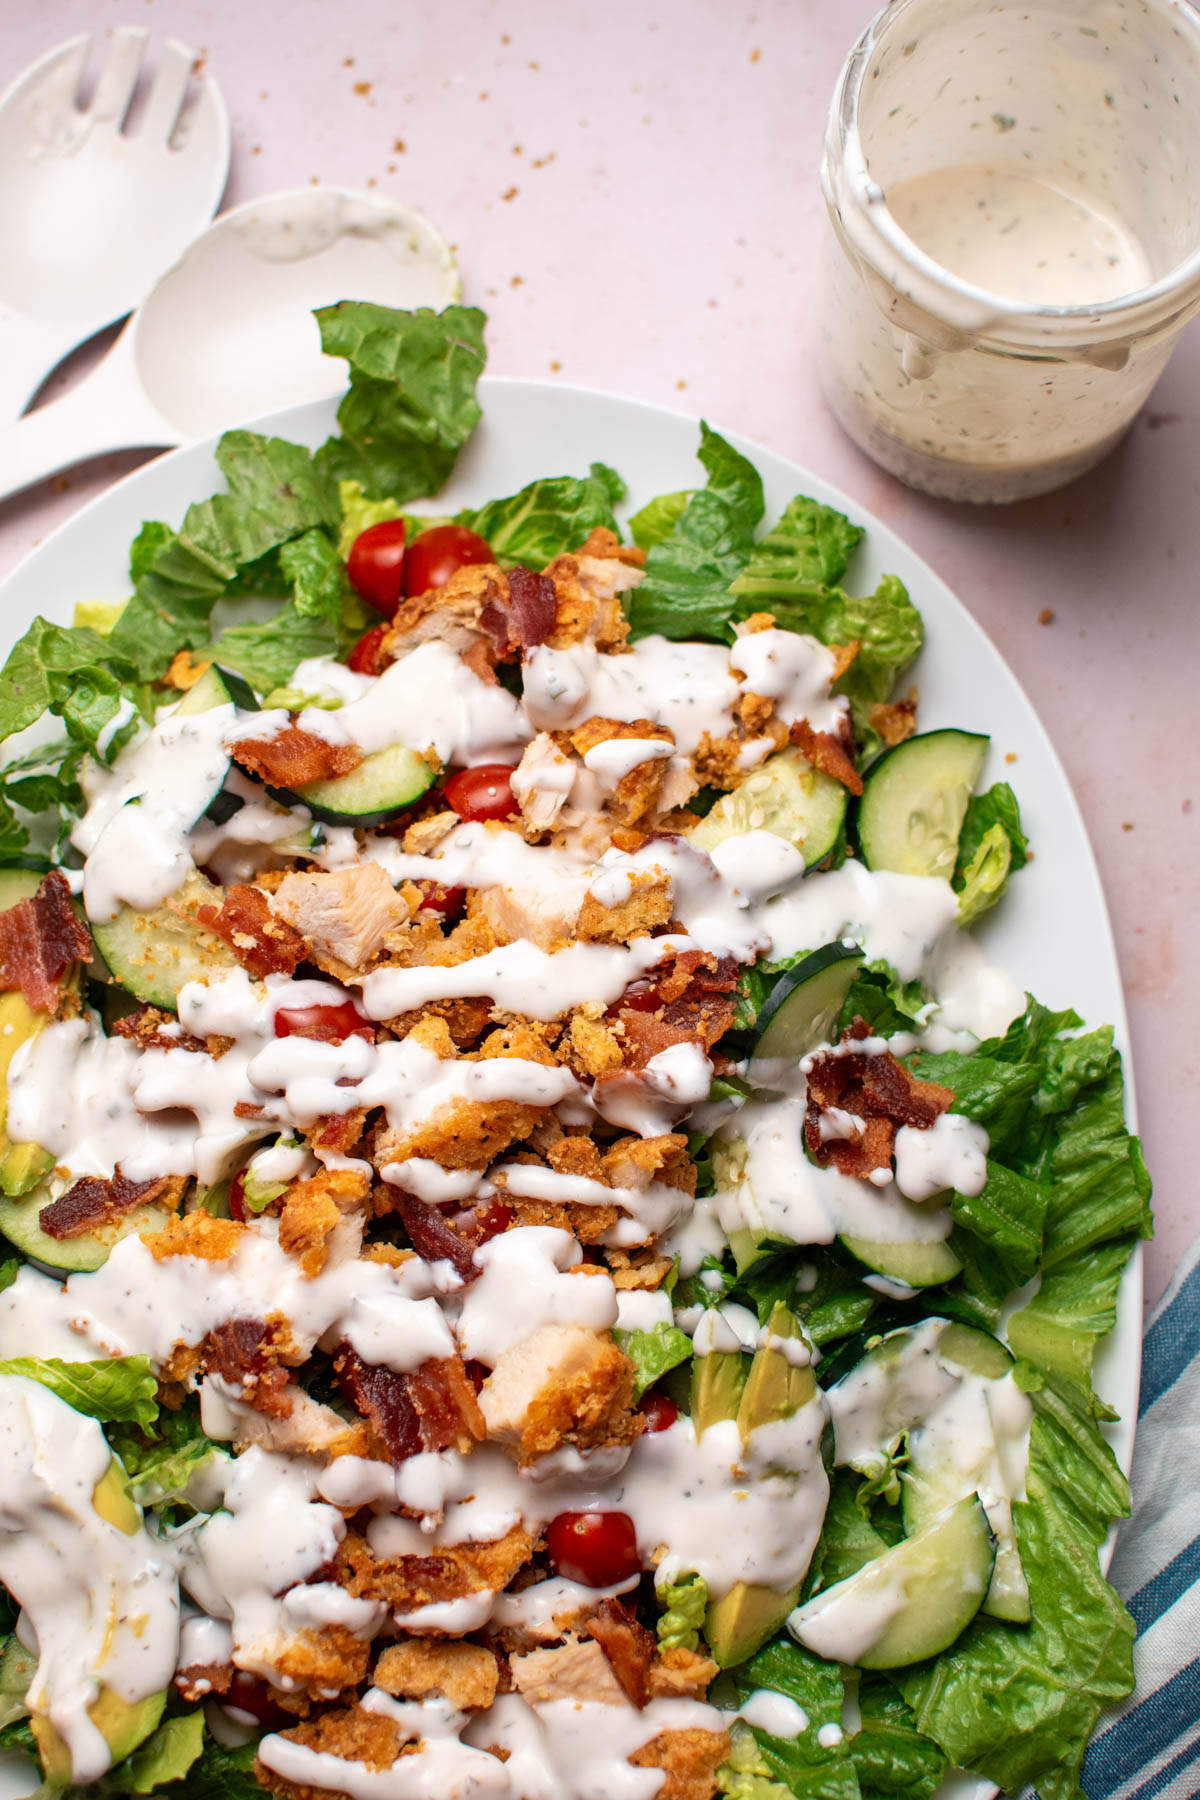 BLT salad with crispy chicken and ranch dressing drizzled over the top on white platter.